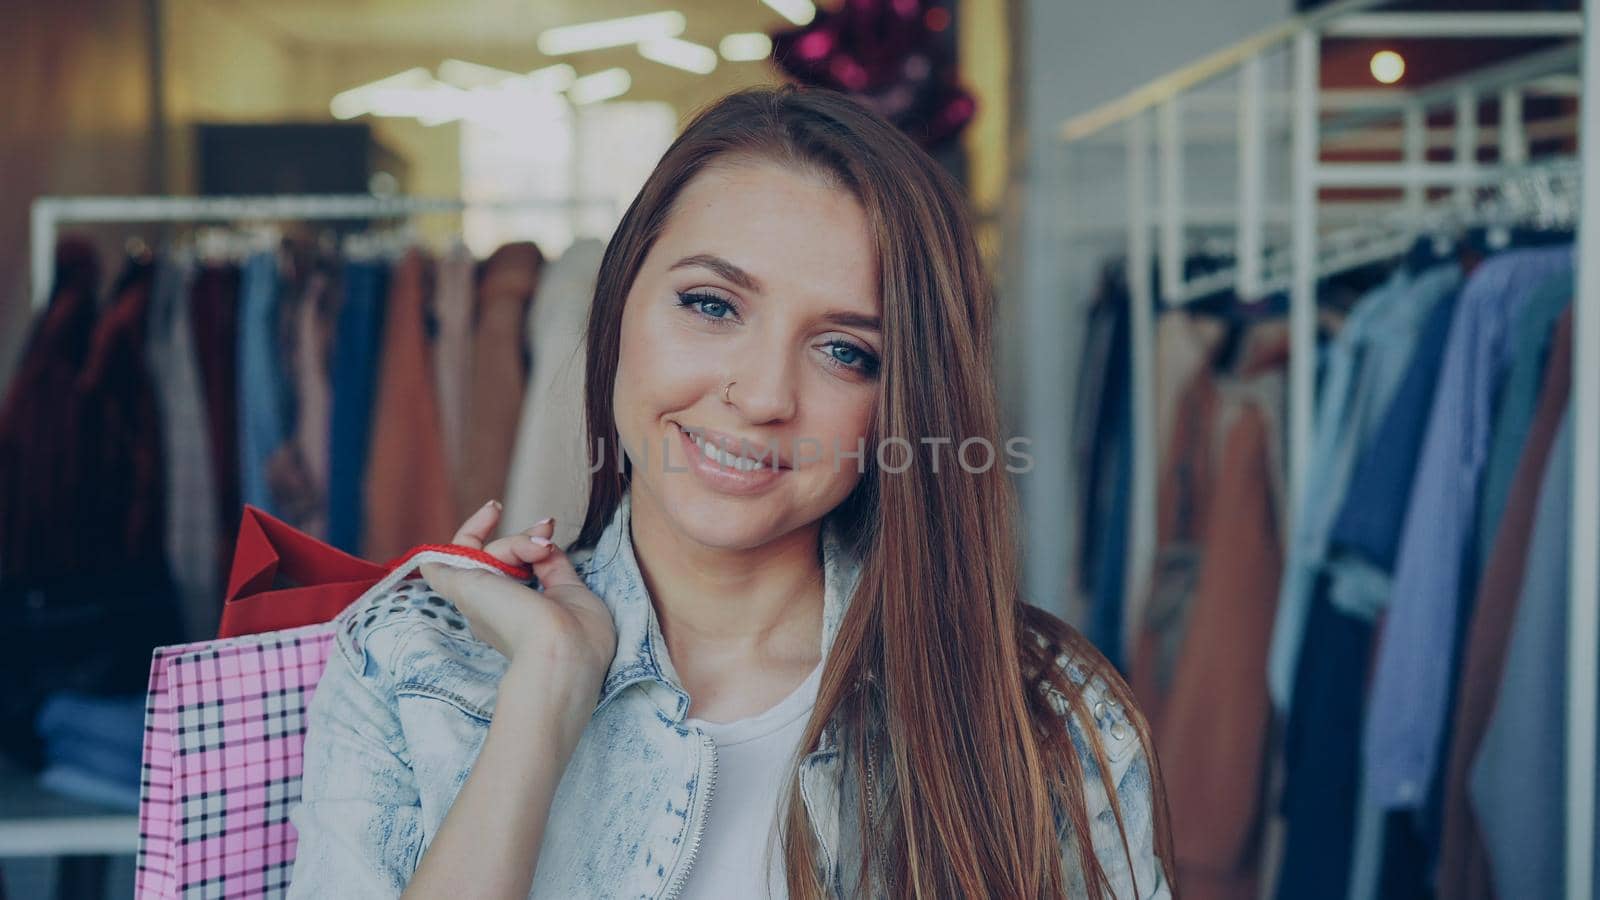 Close-up portrait of attractive young girl standing with paper bags in clothing shop and looking at camera smiling. Stylish women's clothes is in background. by silverkblack